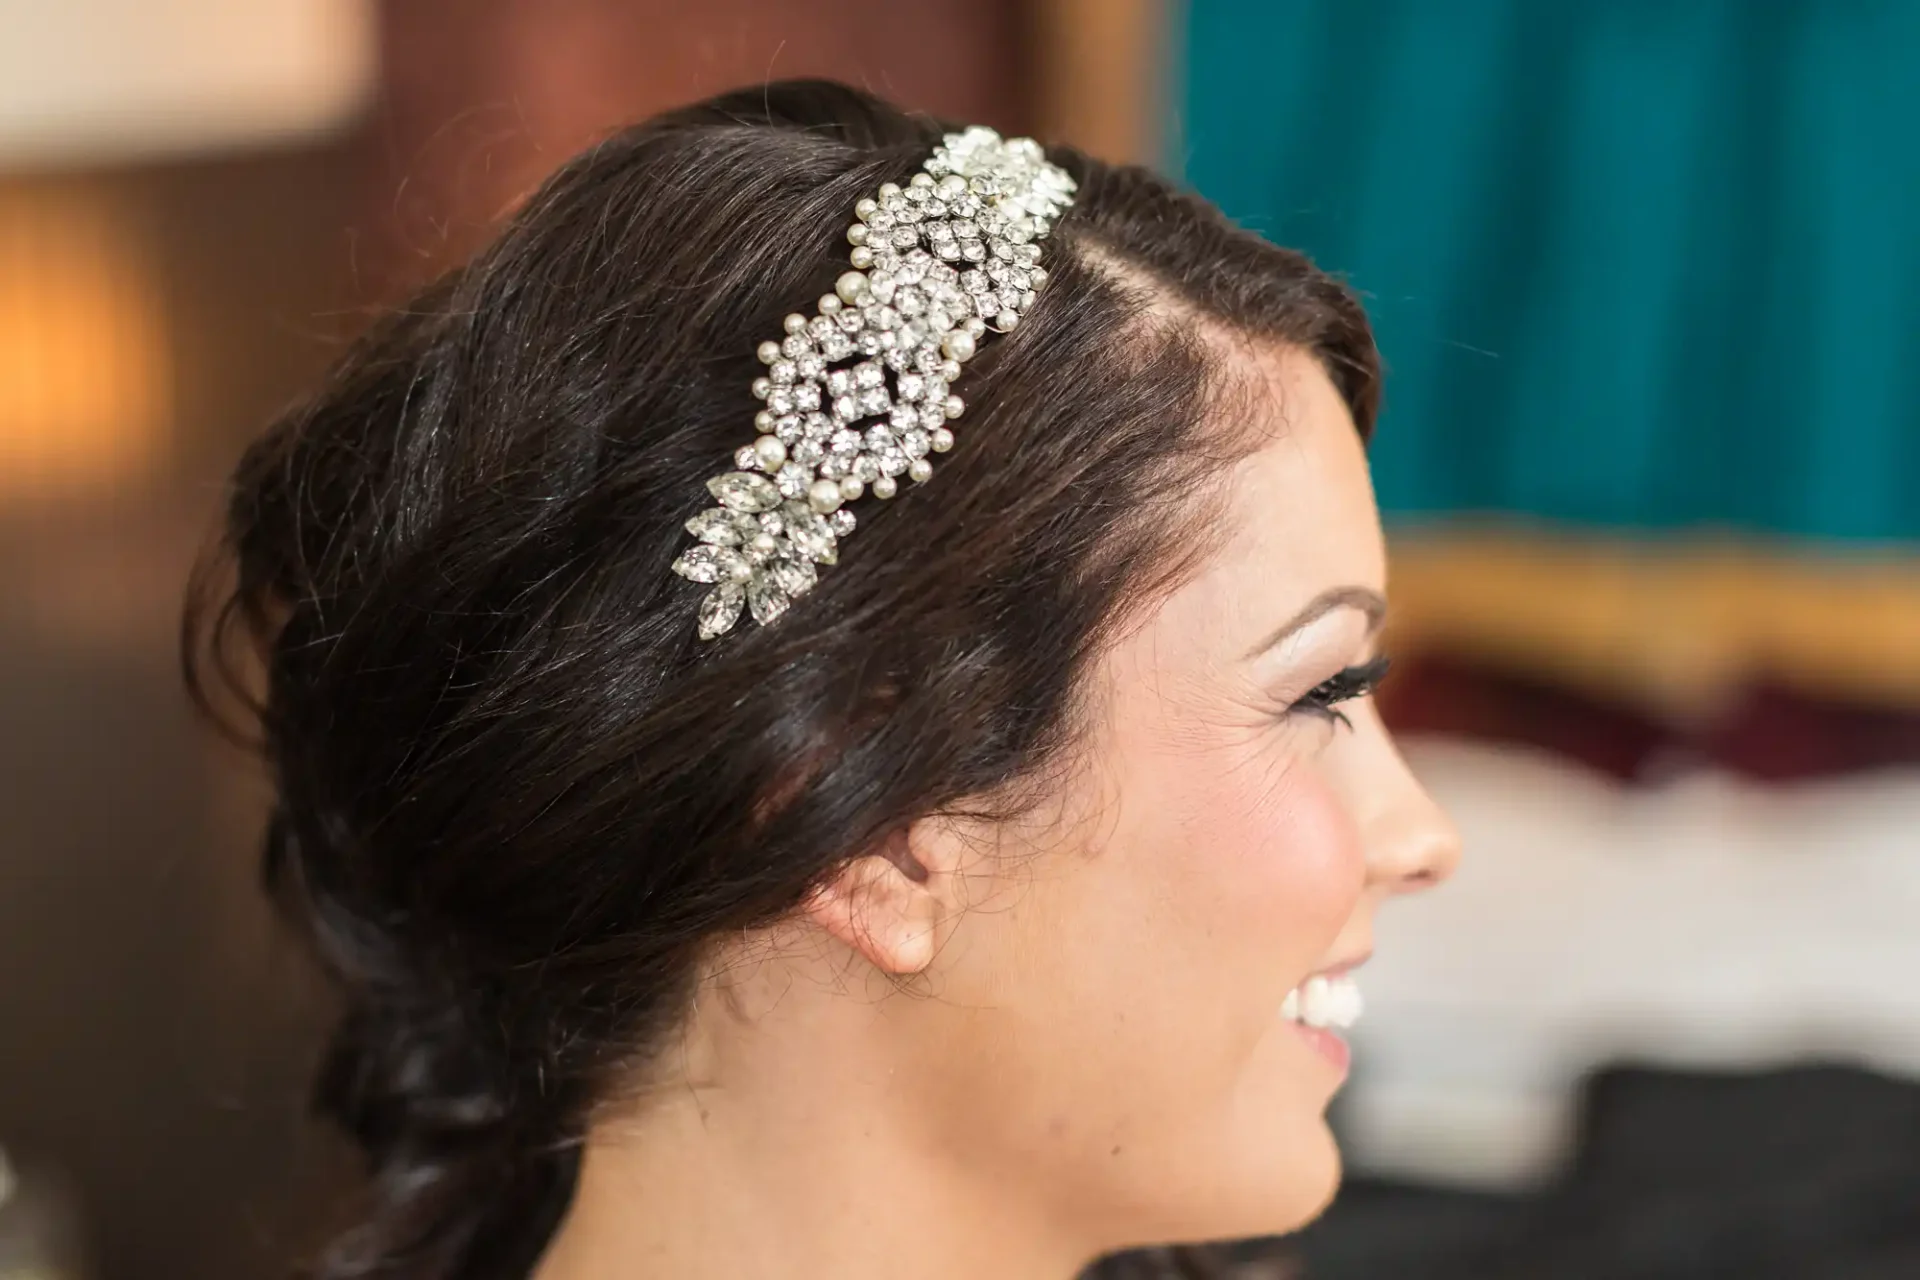 Side profile of a smiling woman with an elaborate rhinestone hair accessory in an elegant updo.